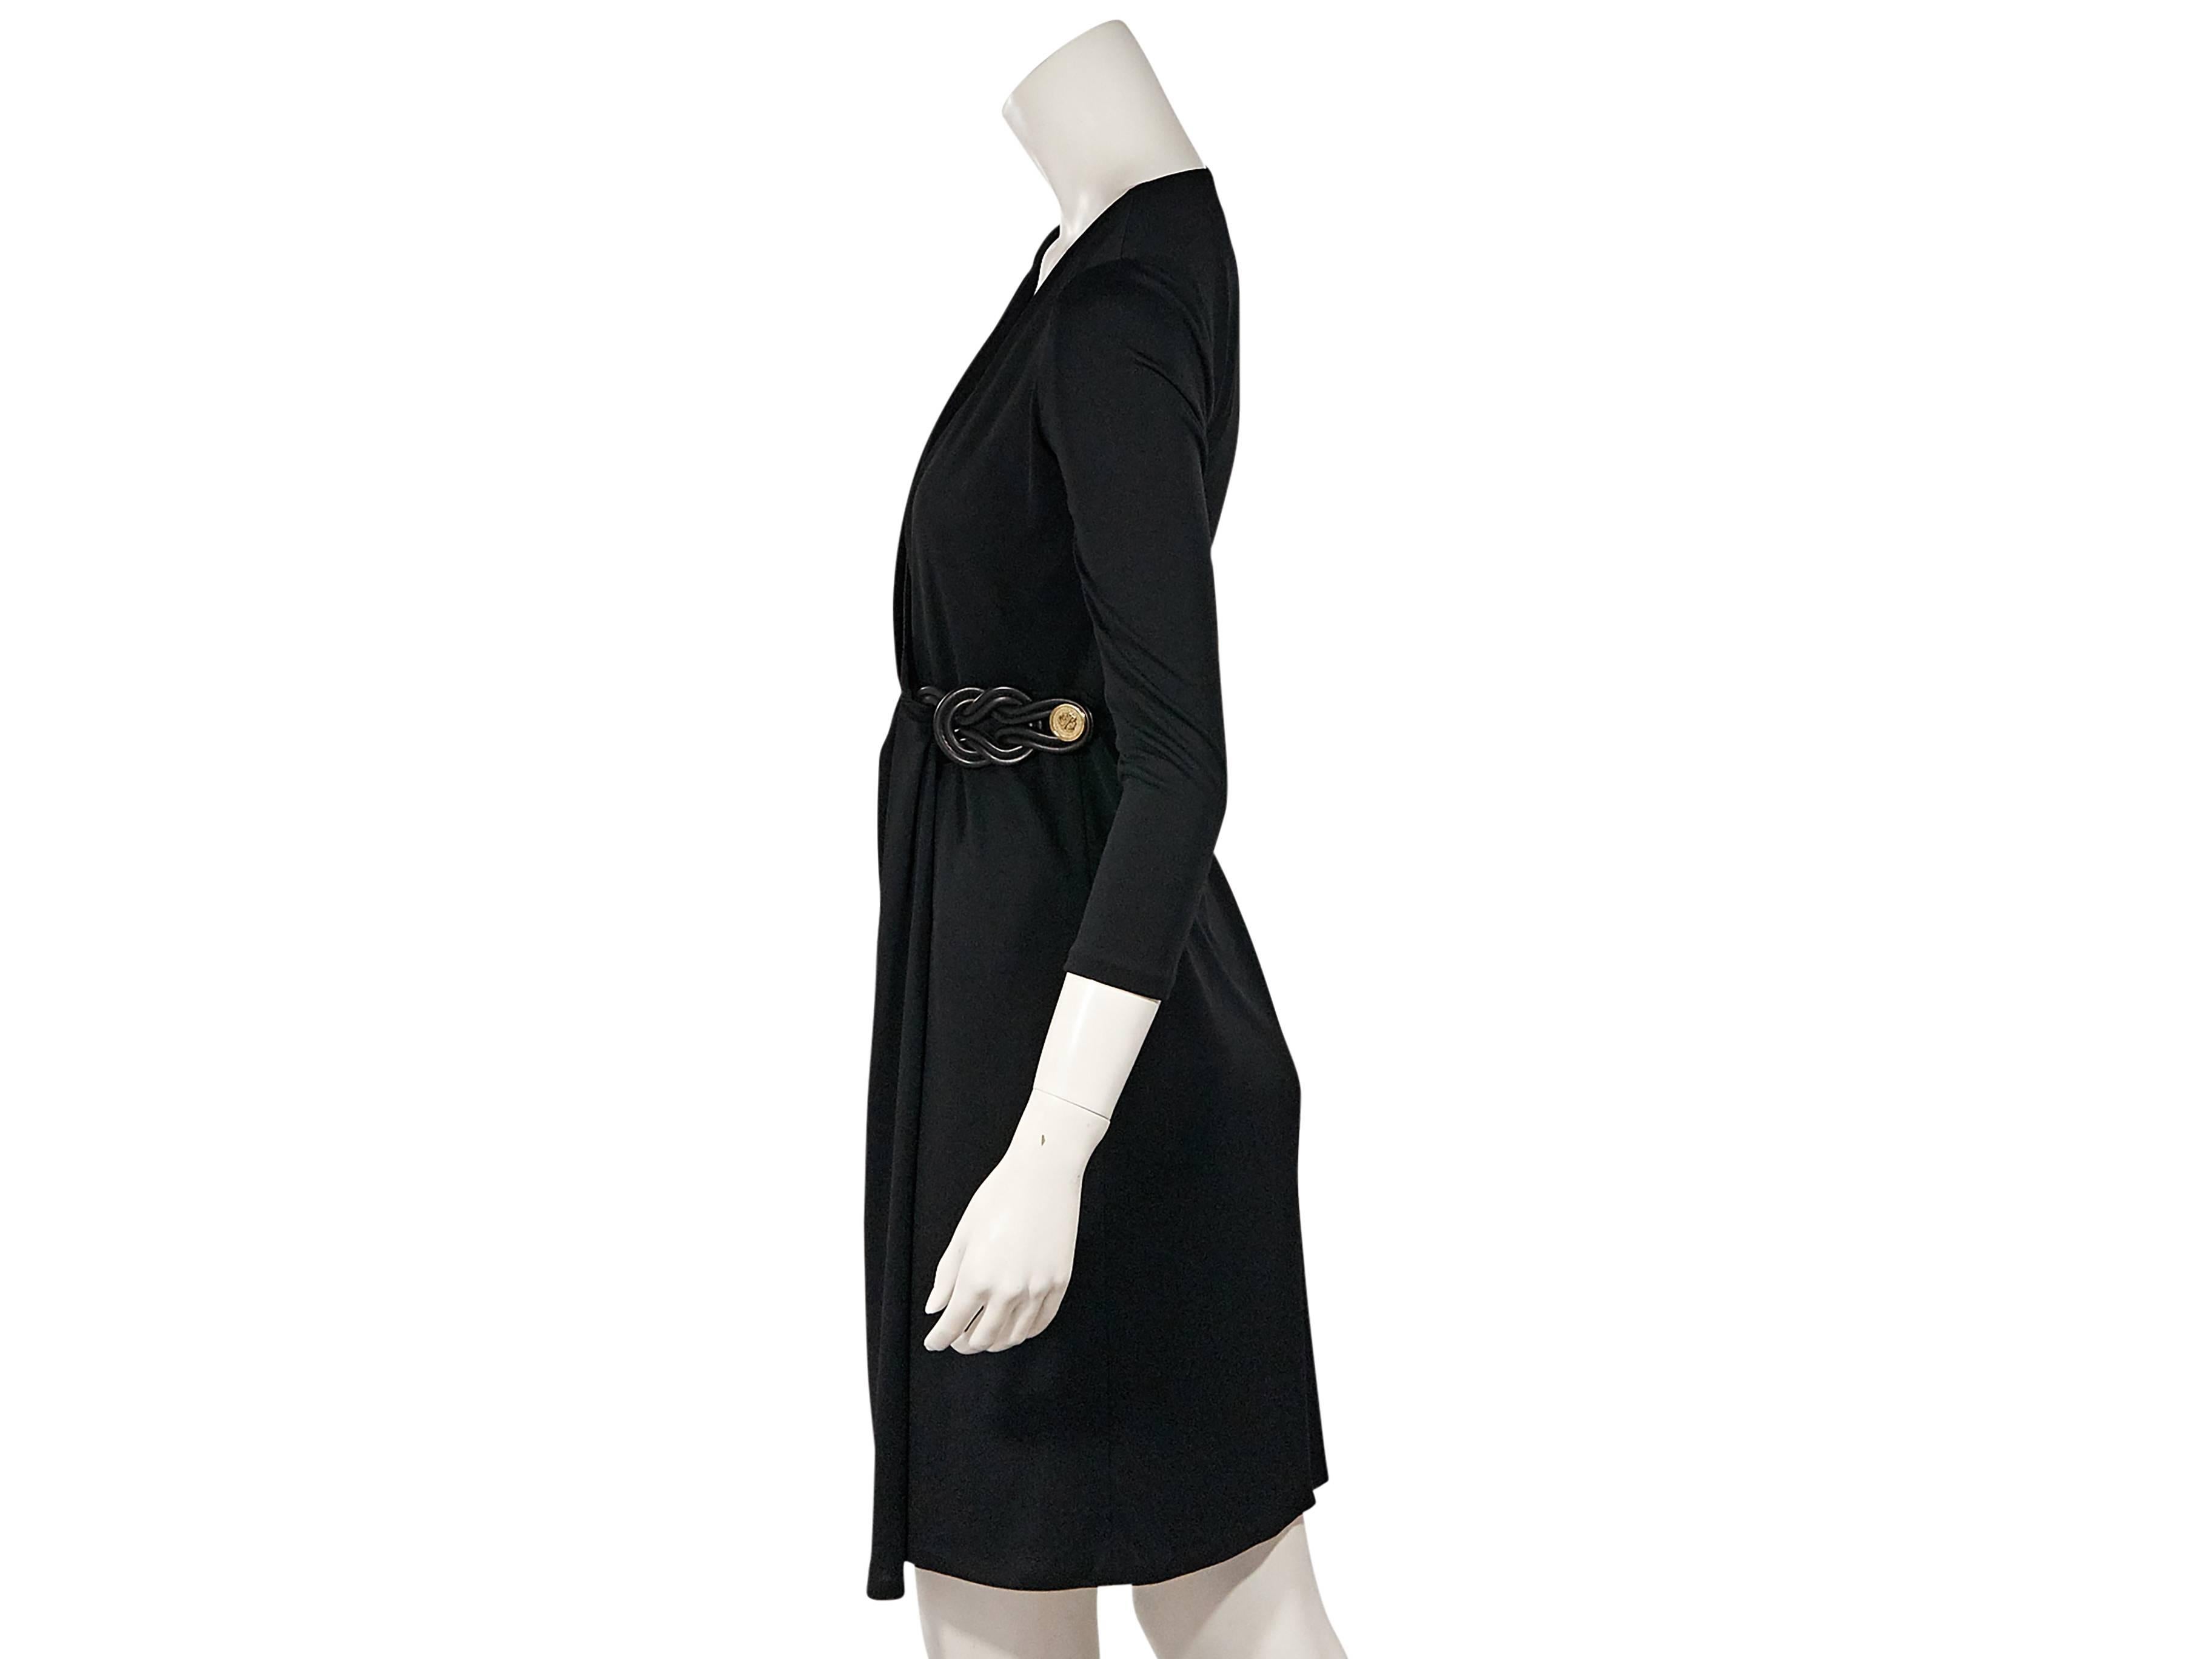 Product details:  Black wrap dress by Gucci.  V-neck.  Three-quarter length sleeves.  Button closure.  Label size IT 38.   
Condition: New with tags. 
Est. Retail $ 1,995.00